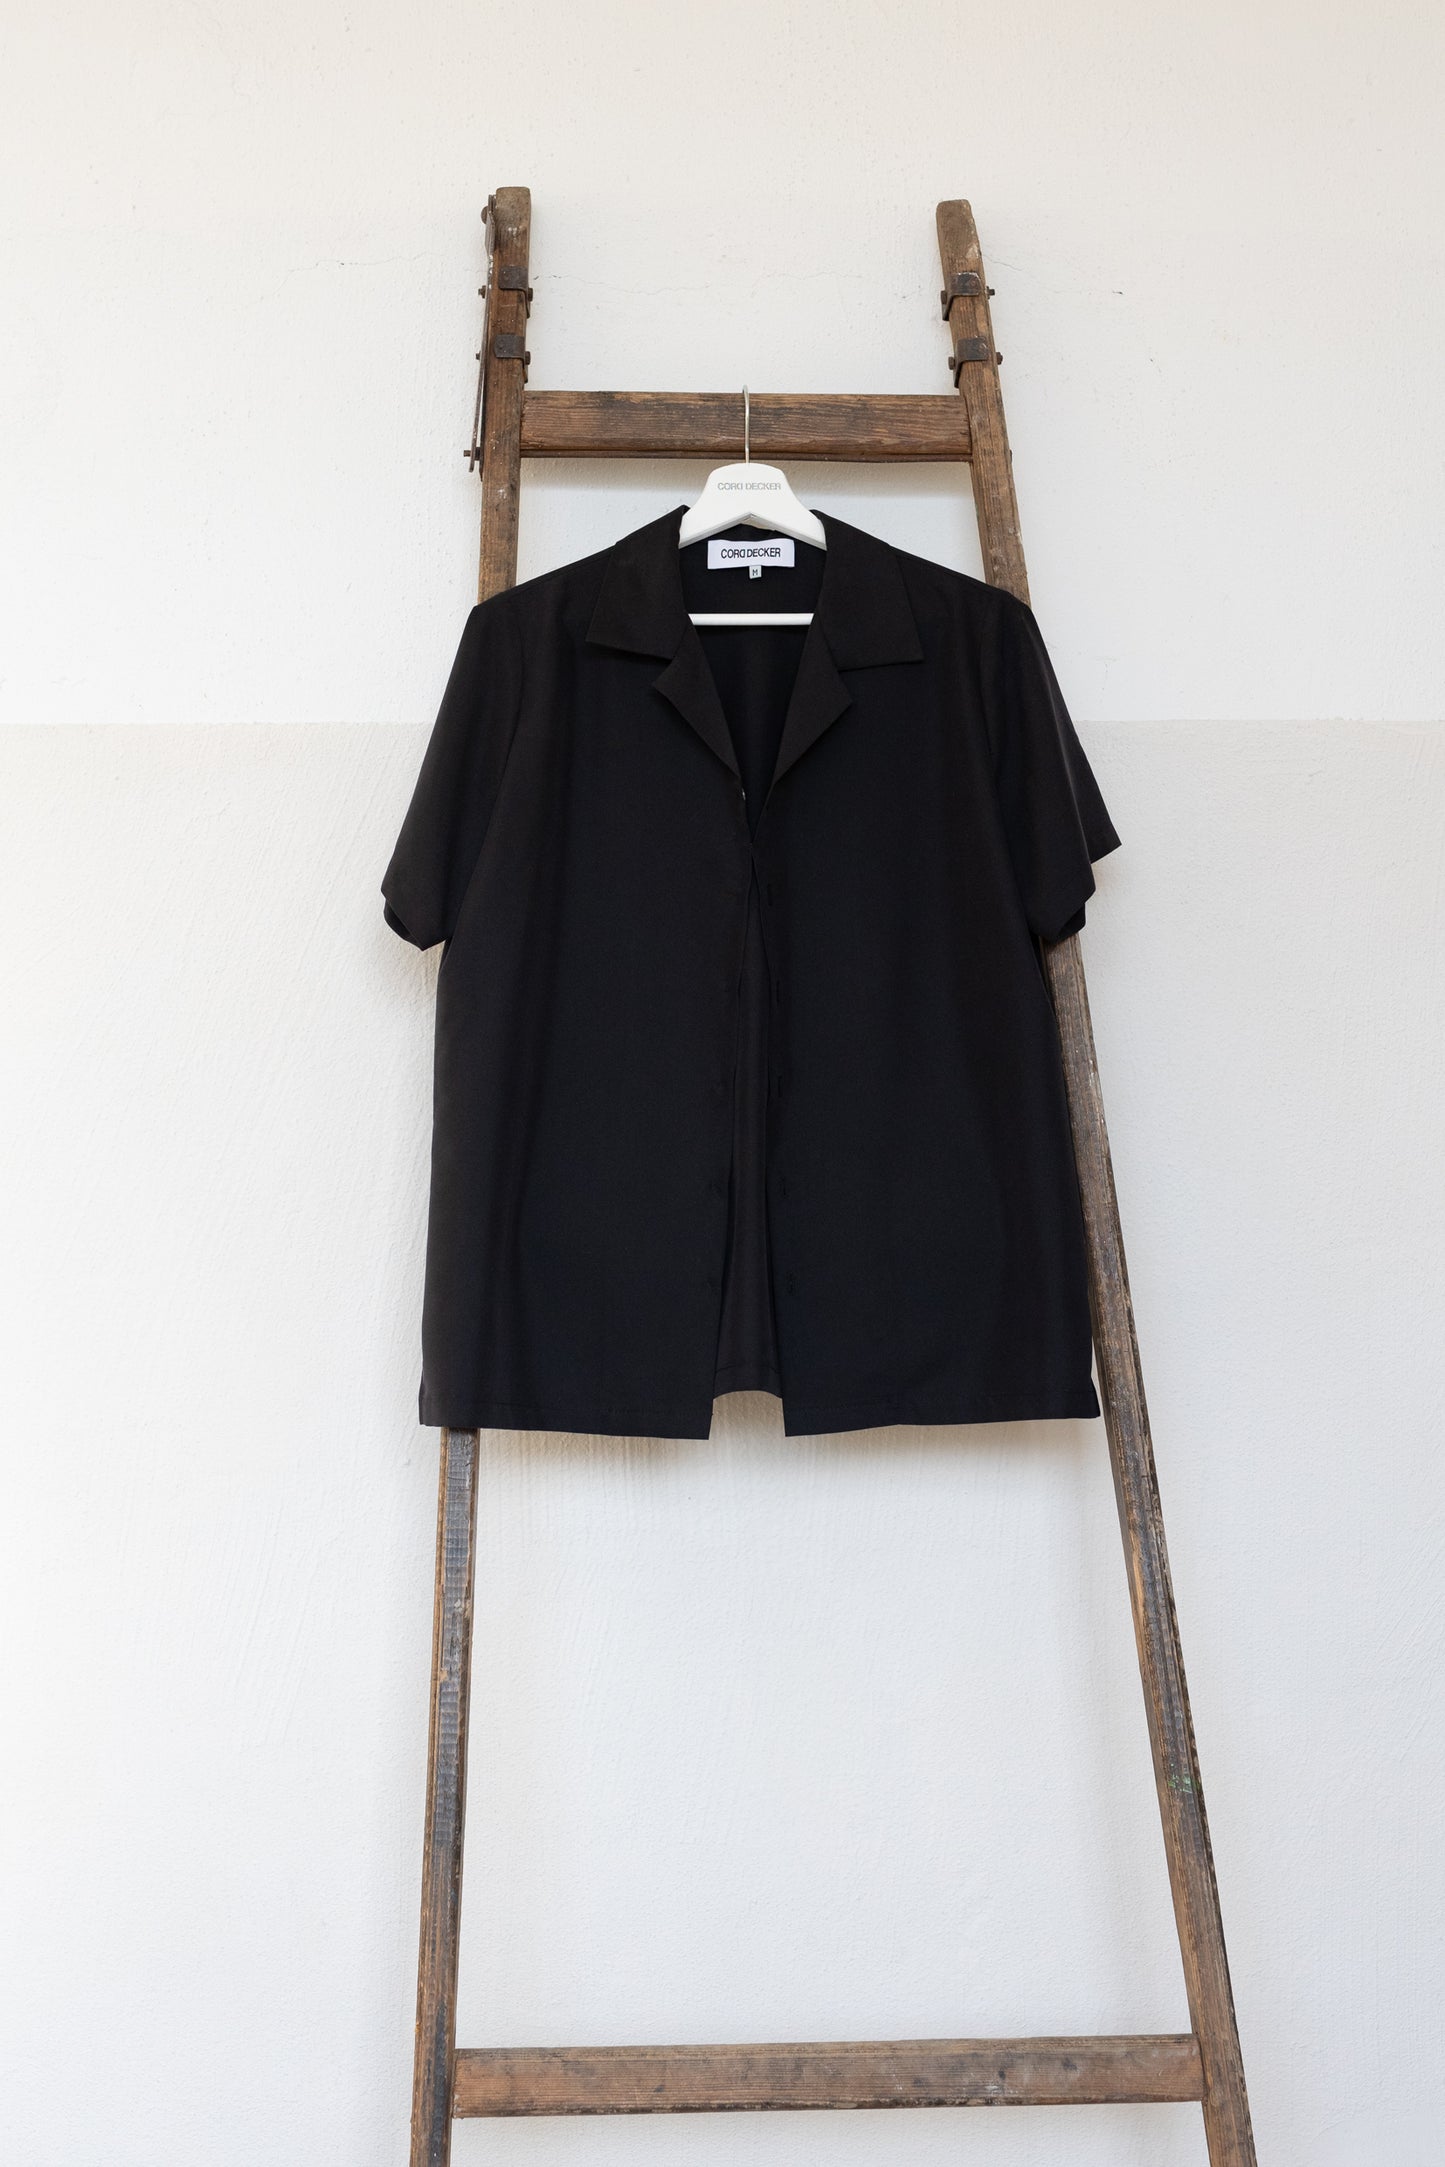 Women's black shirt with short sleeves